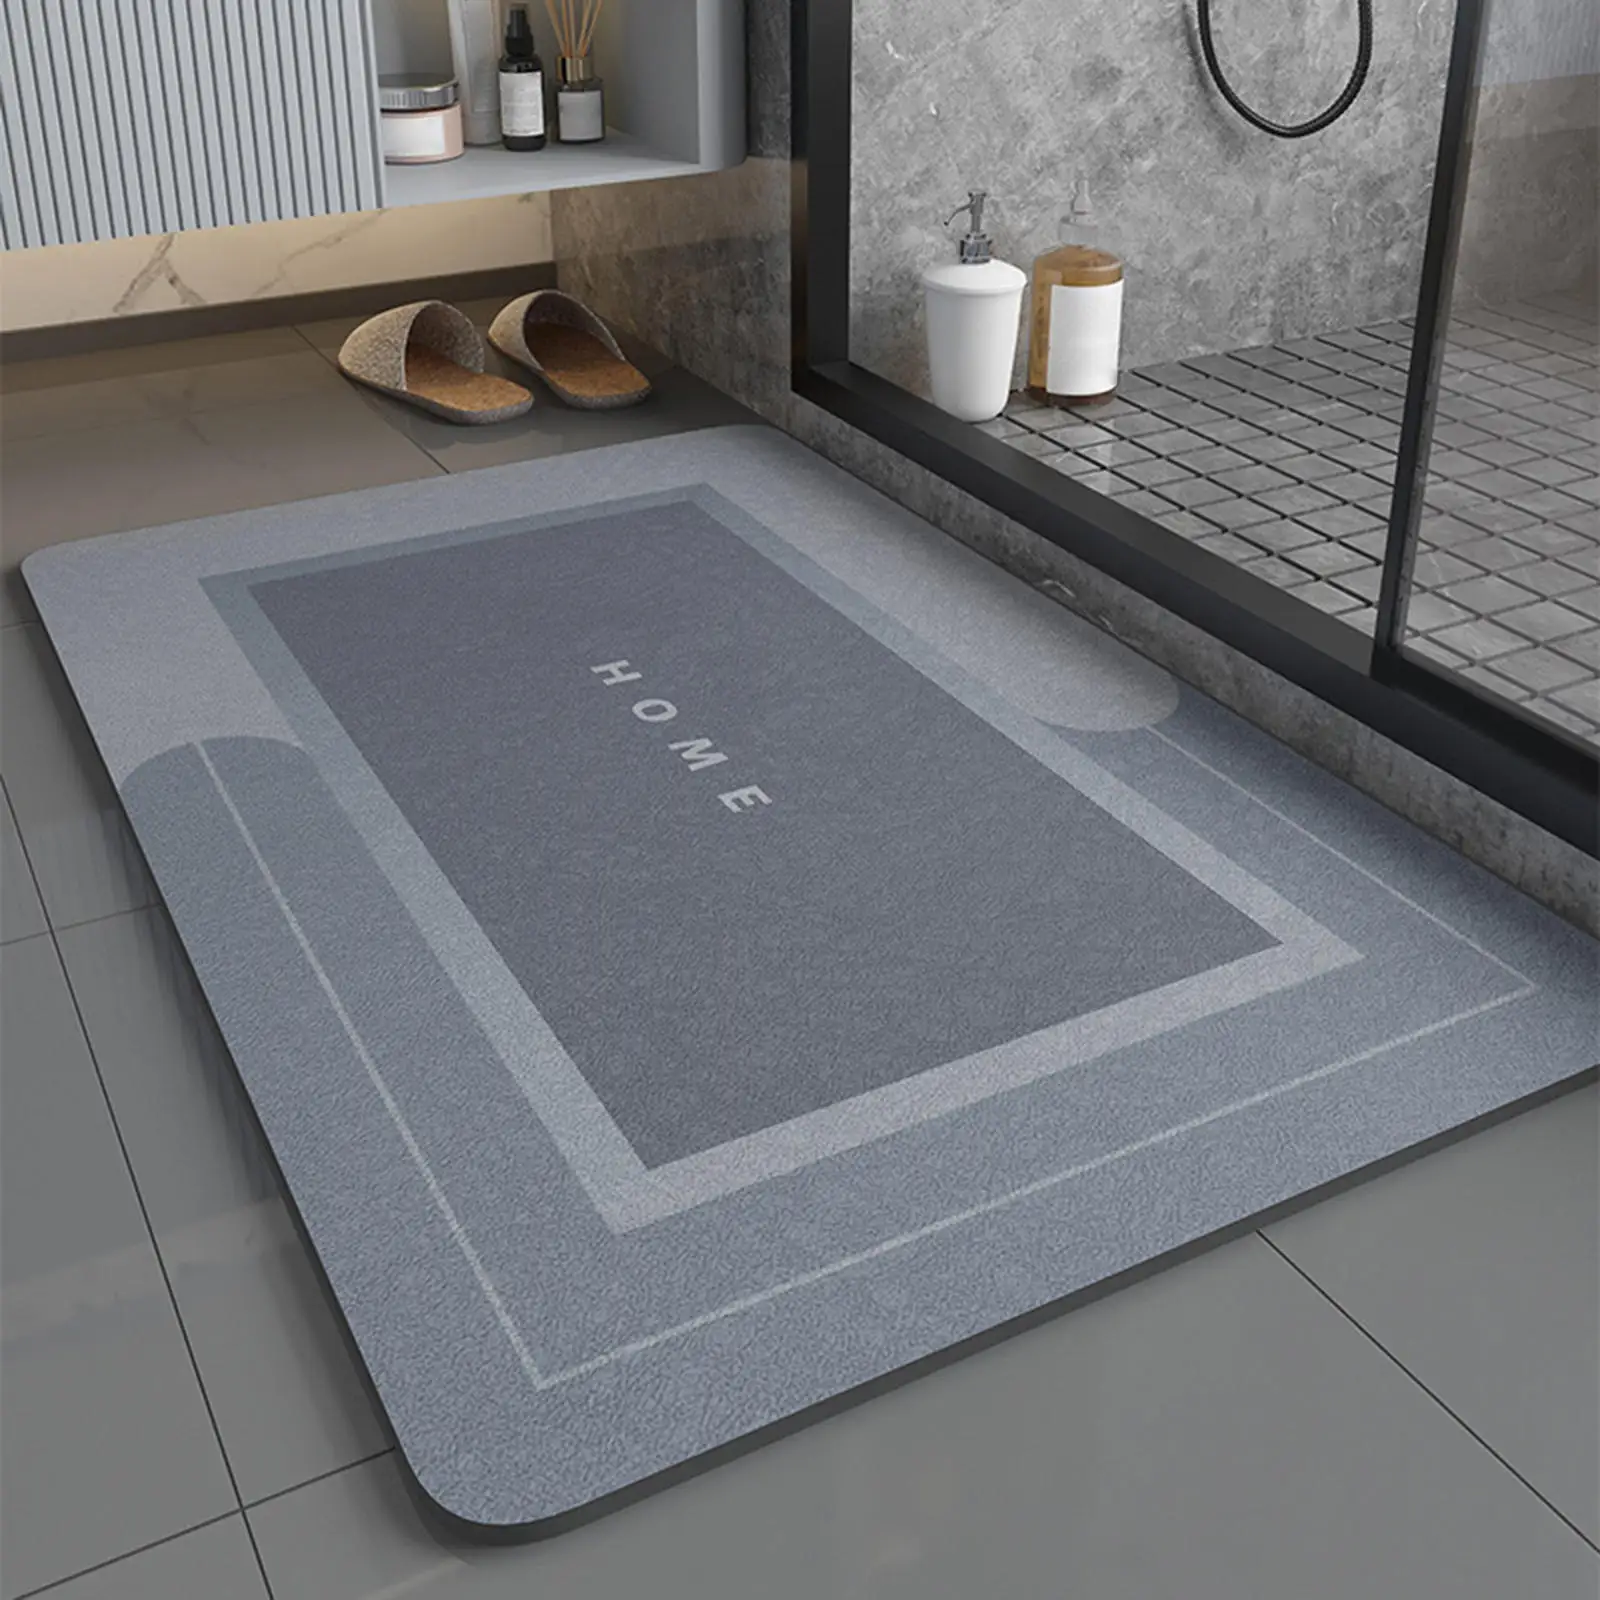 Bath Mat Oilproof Washable Super Cozy Rubber Backing Super Absorbent Bathroom Carpet for Toilet